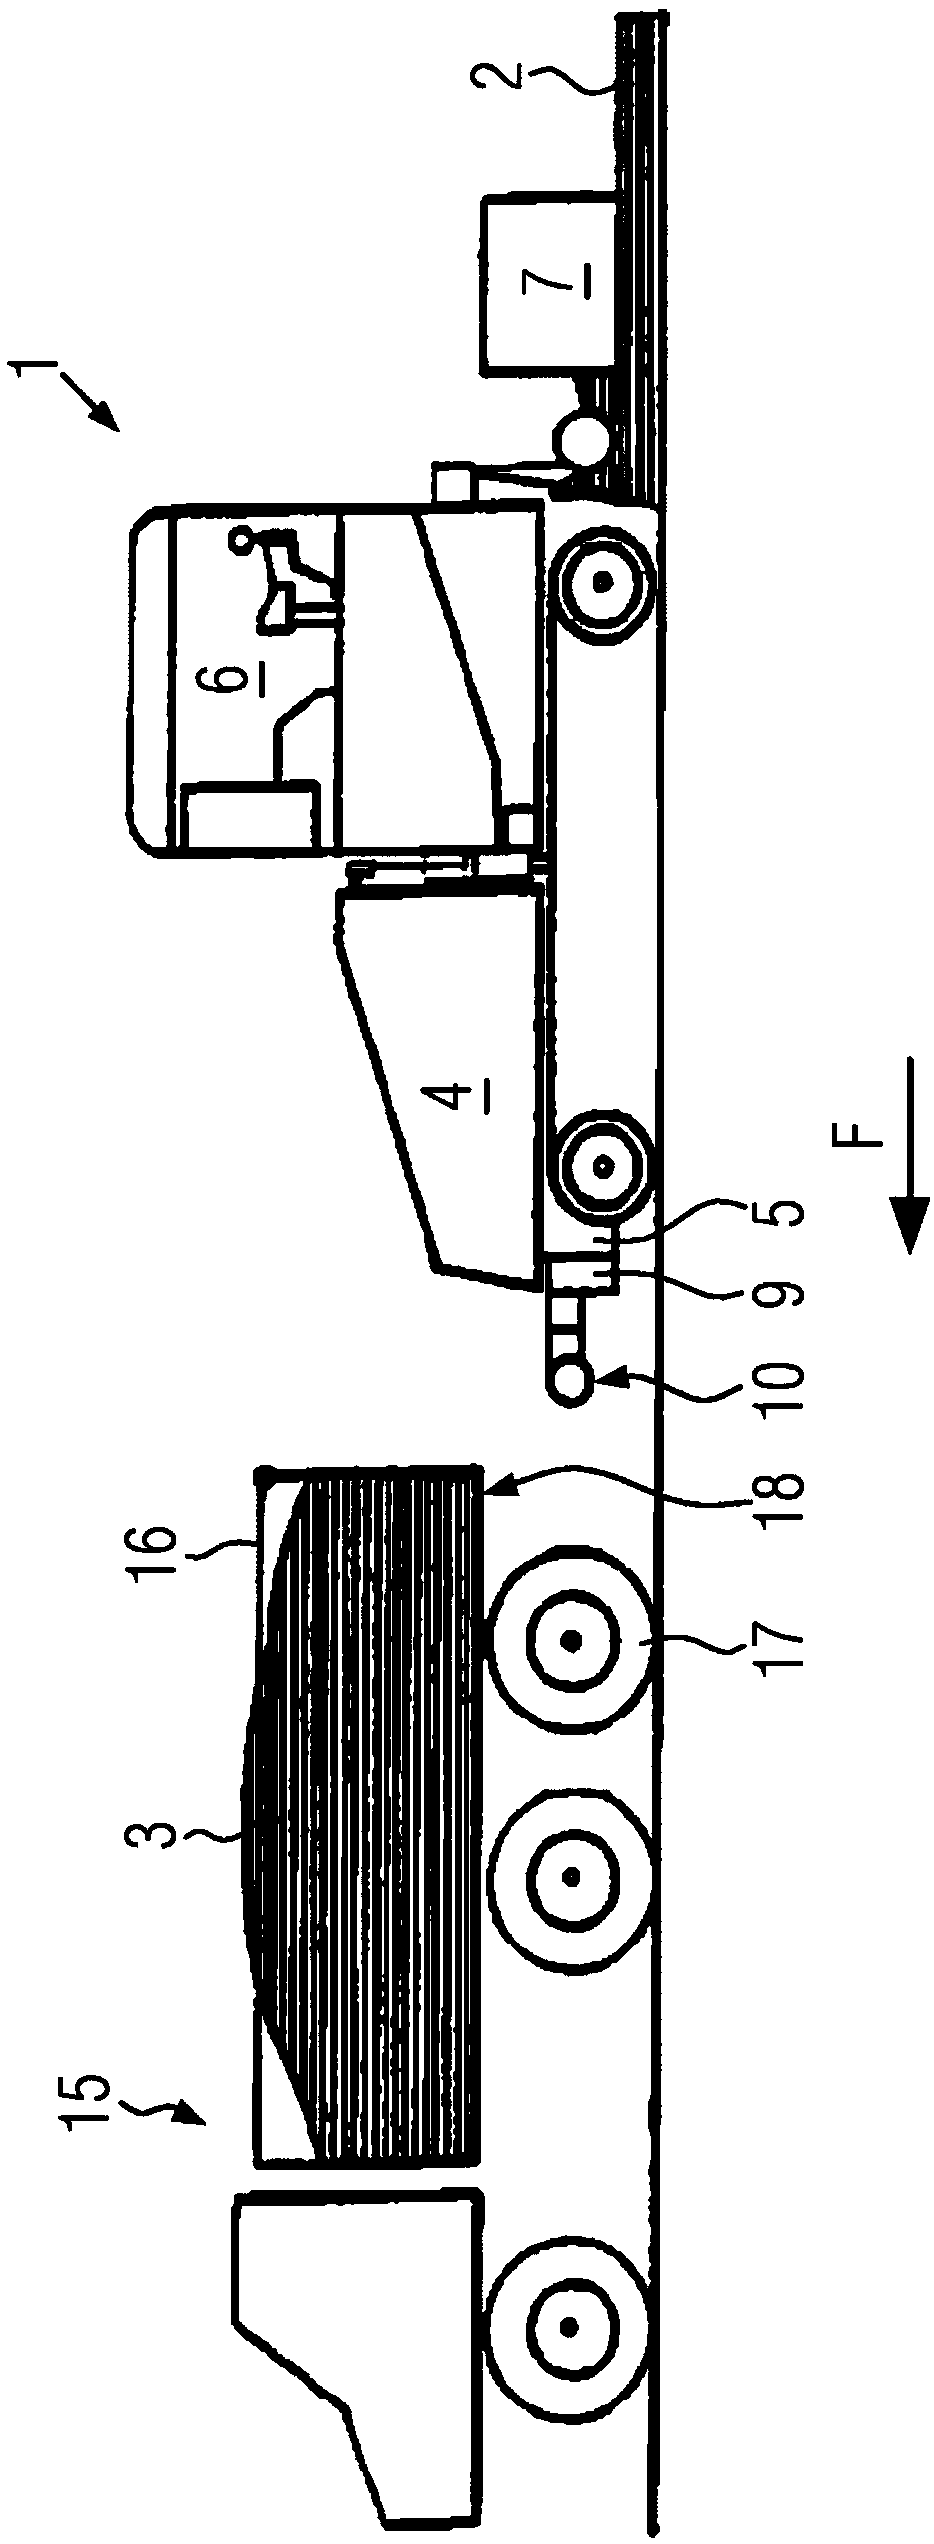 Paver or feeder vehicle with pushing device for a material handover process